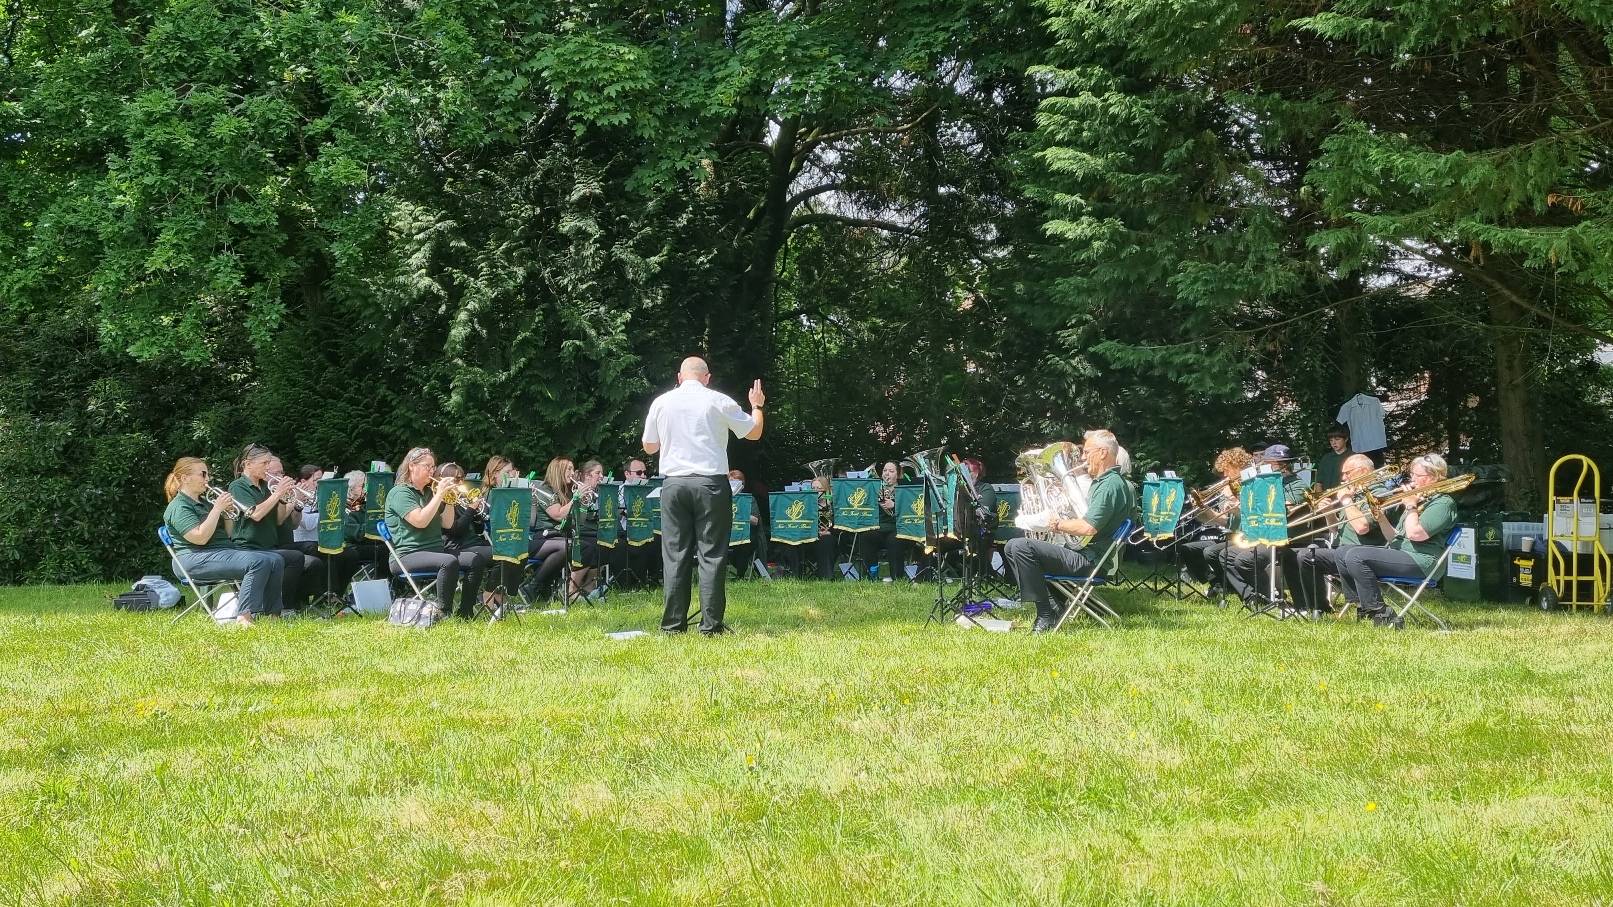 New Forest Brass Community band at the Jubilee Celebrations in Ashurst